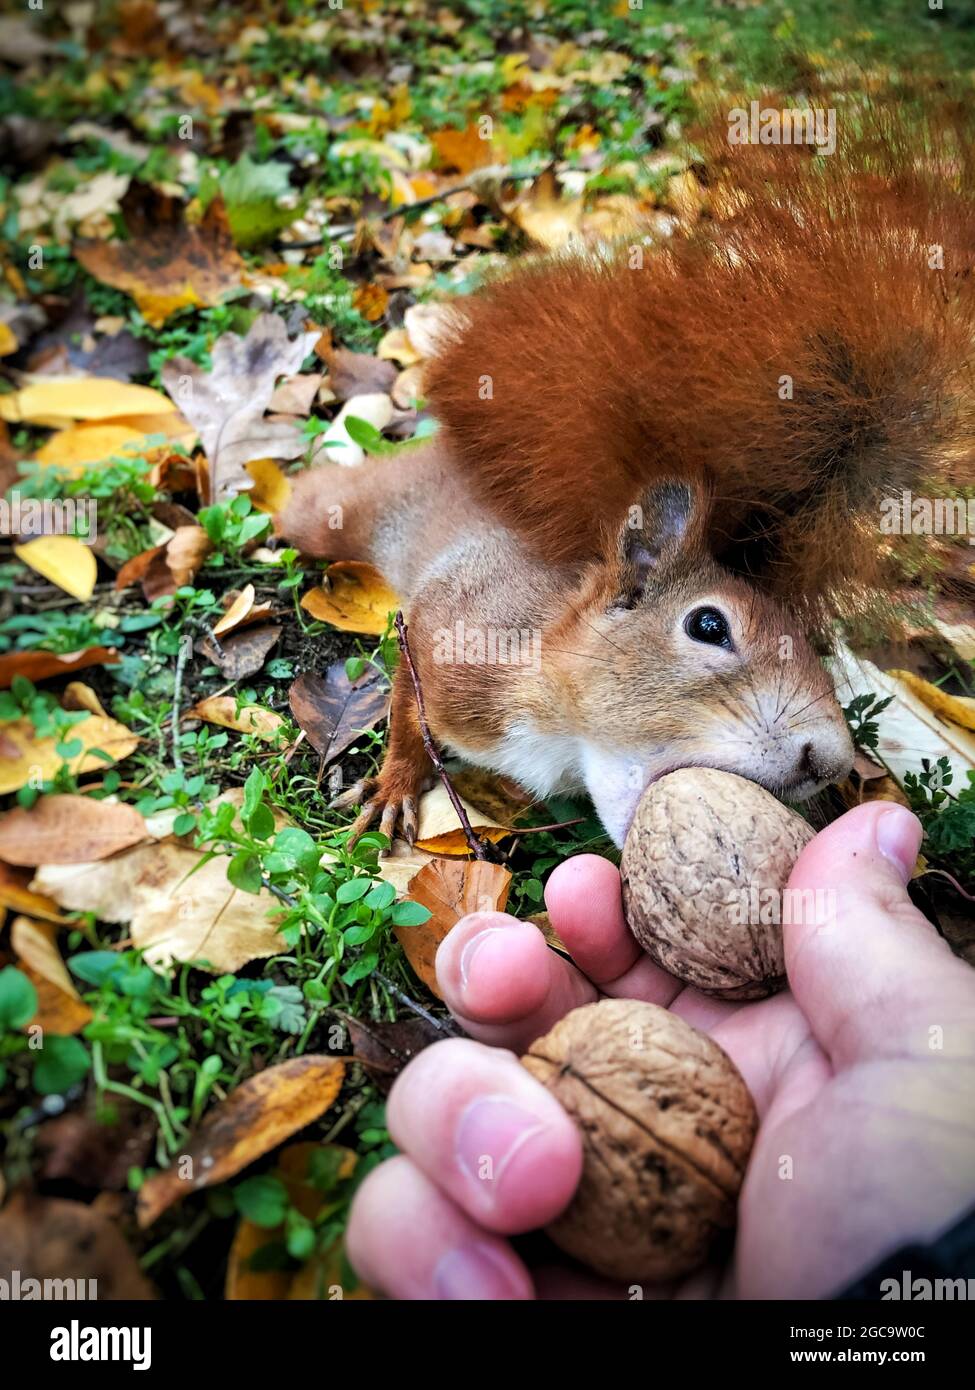 The cute red squirrel (Sciurus vulgaris) takes a nut from a human hand. Feeding squirrel from hand. Stock Photo